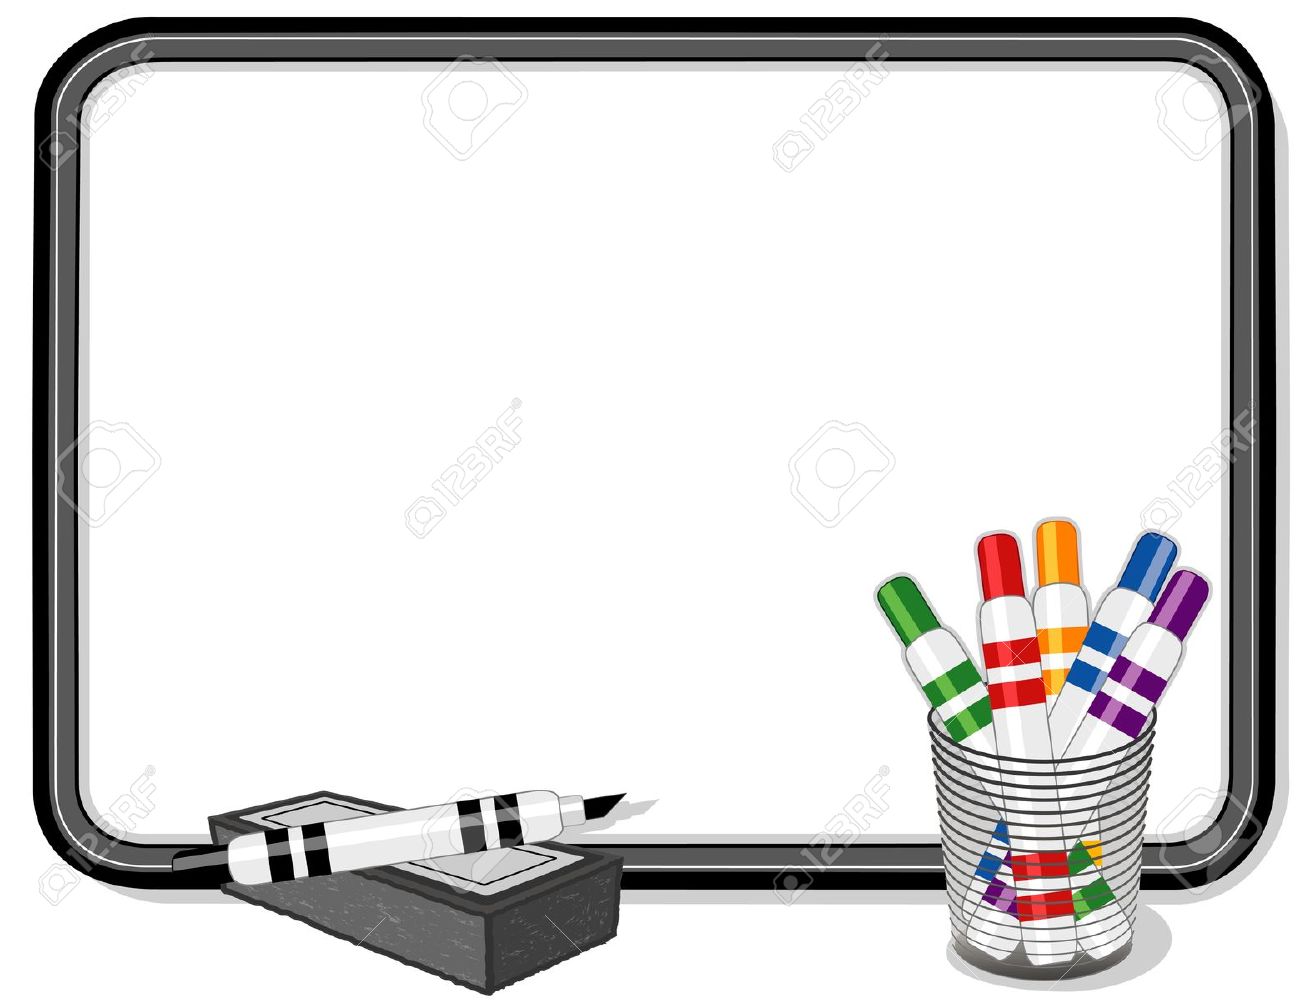 Whiteboard Cliparts